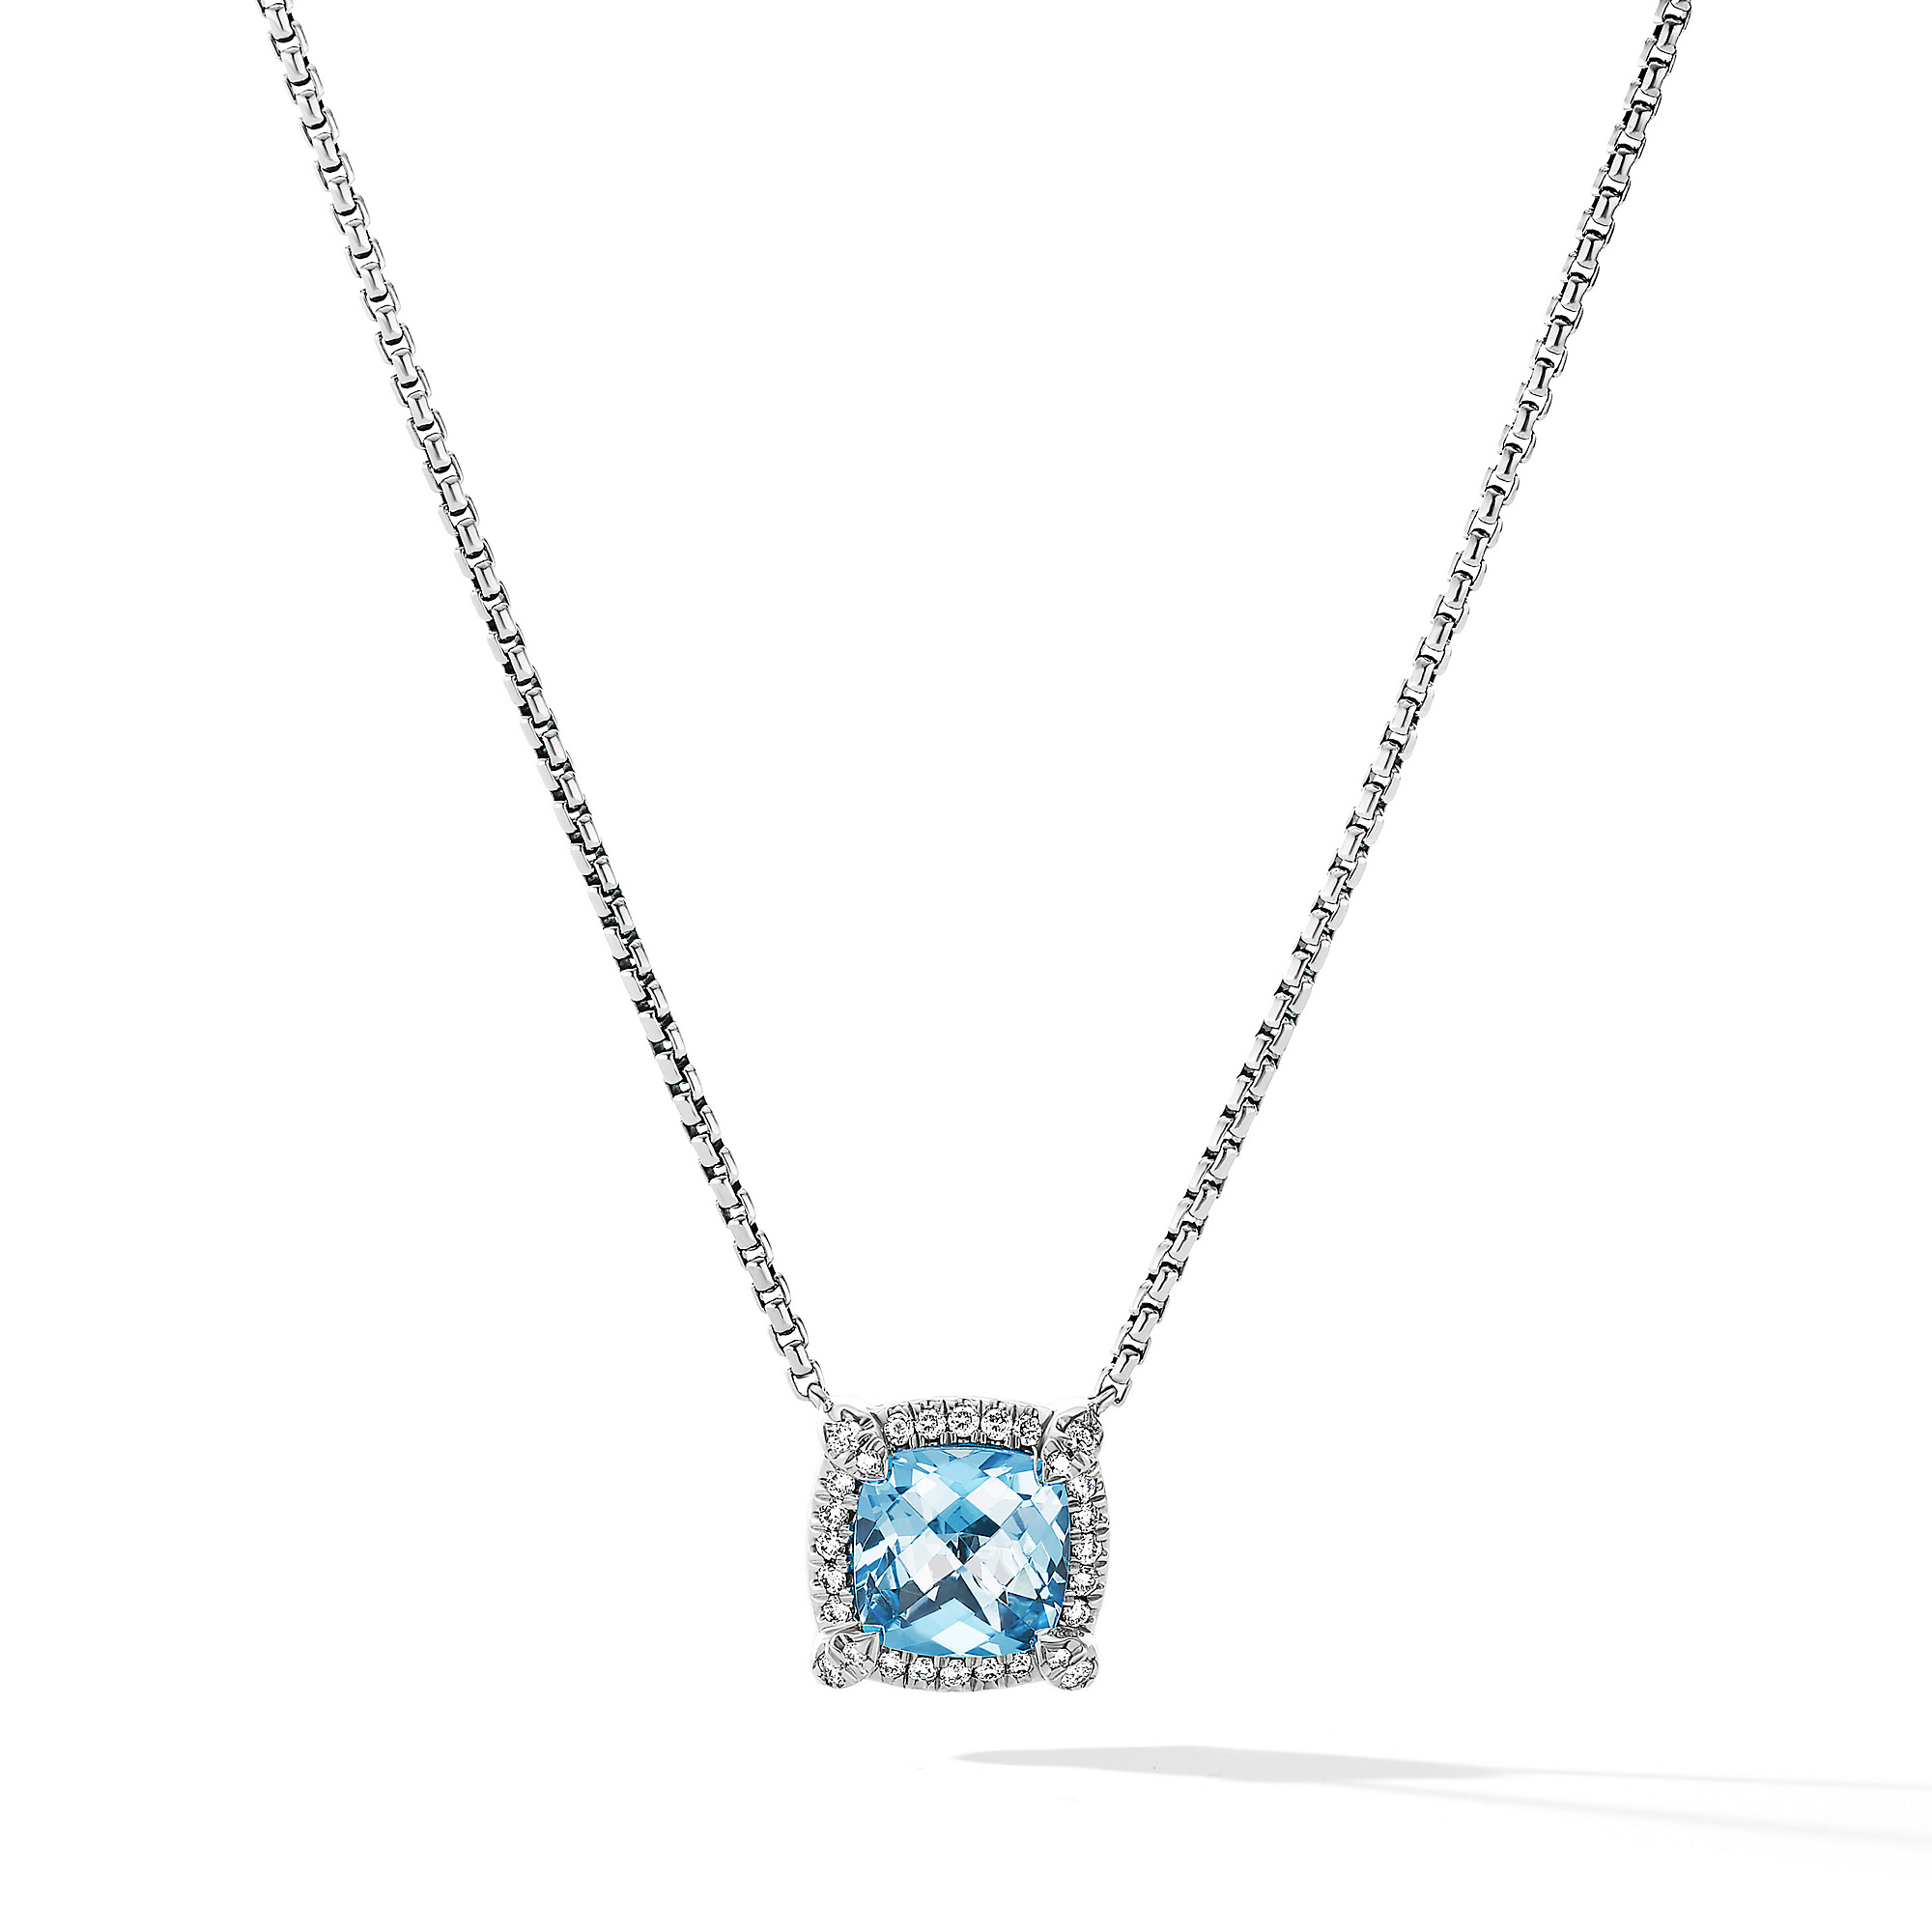 Petite Chatelaine® Pave Bezel Pendant Necklace in Sterling Silver with Blue Topaz and Diamonds